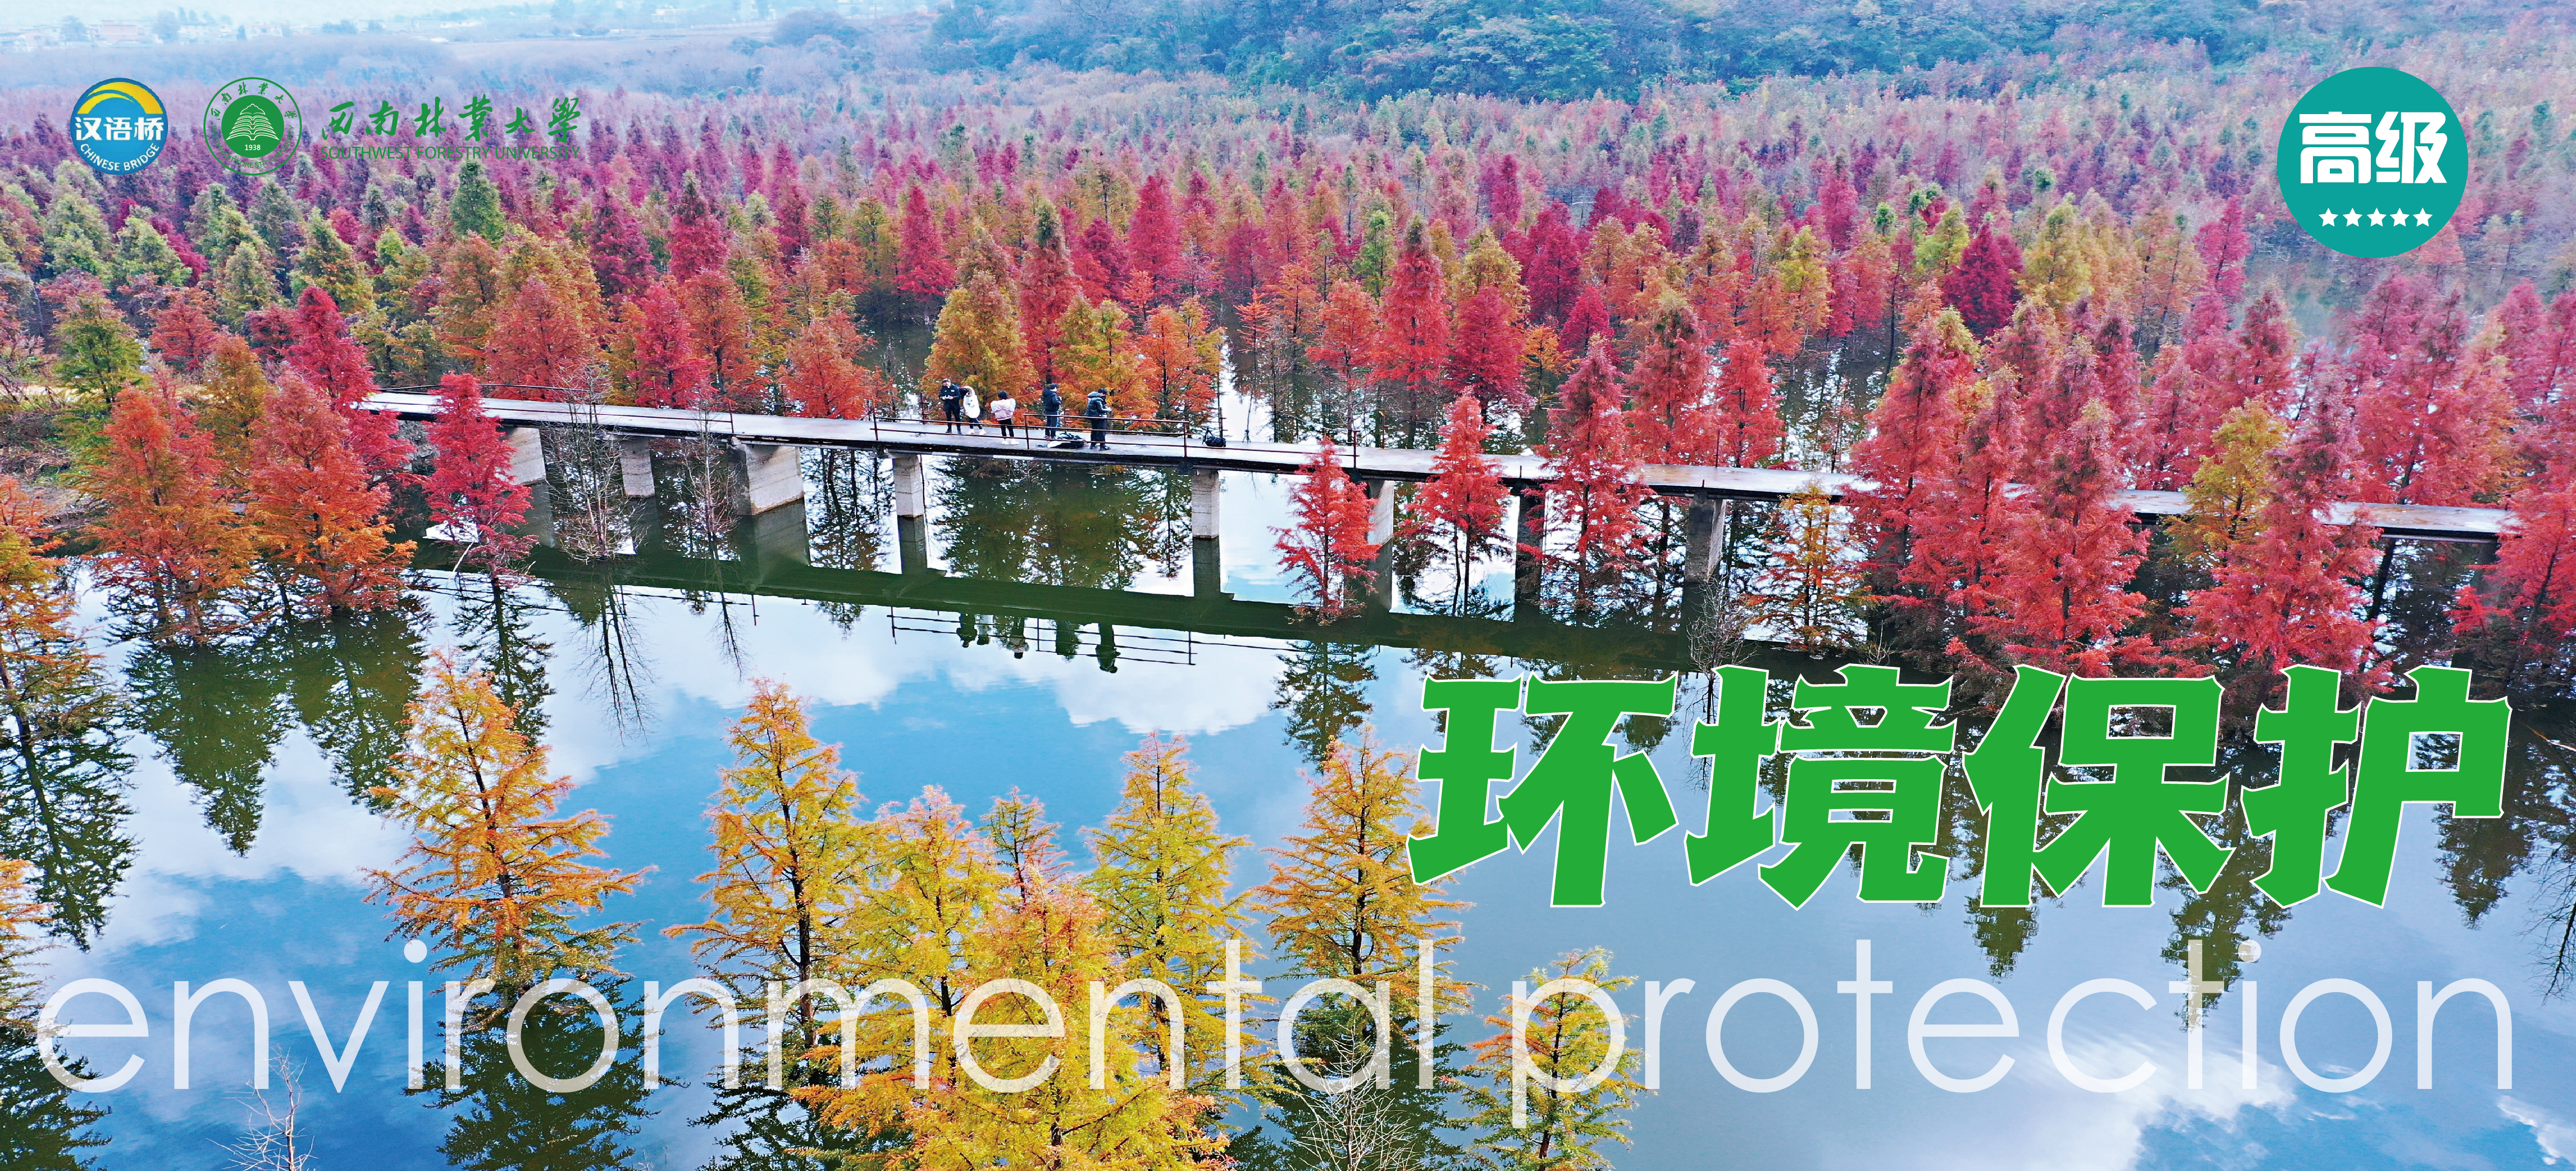 Live Online Chinese Course 4: Environmental Protection  (Level C)